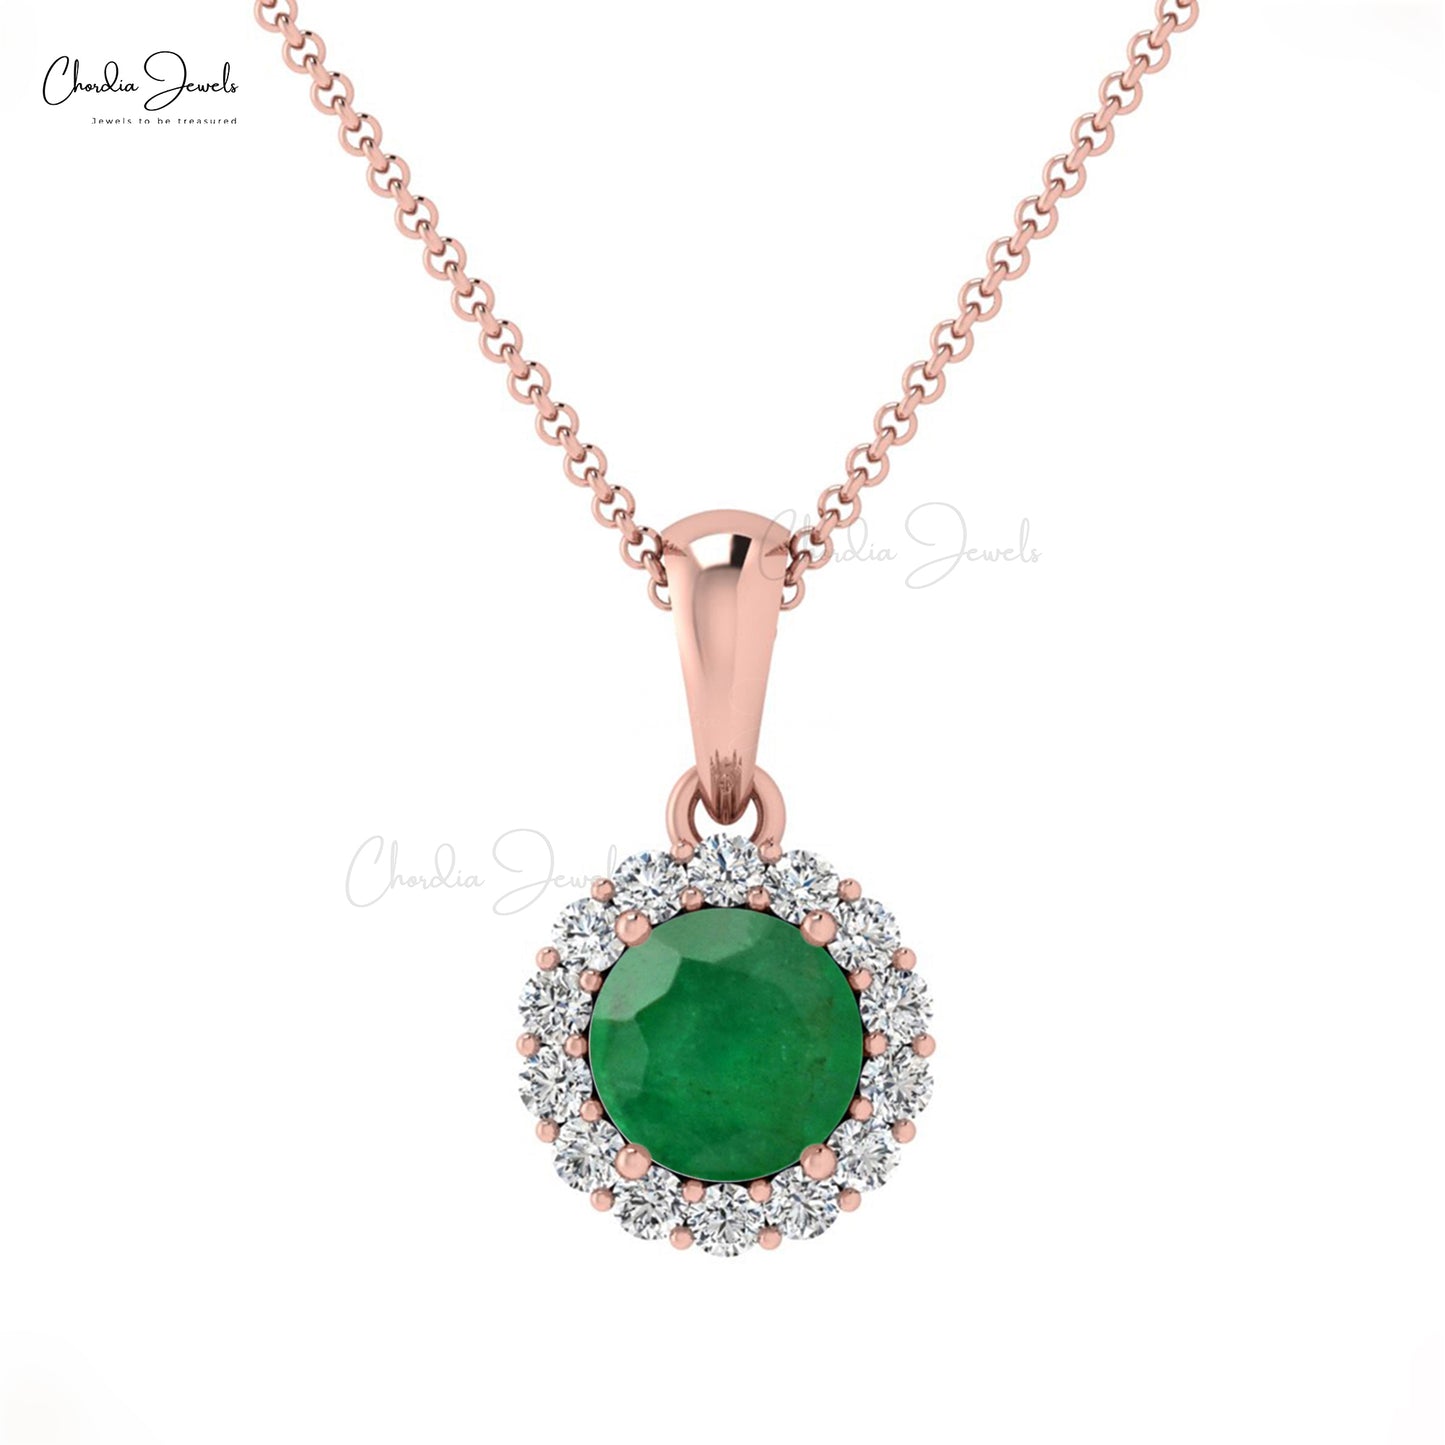 Genuine Diamond Halo Emerald Pendant In 14k Real Gold May Birthstone Handcrafted Pendant